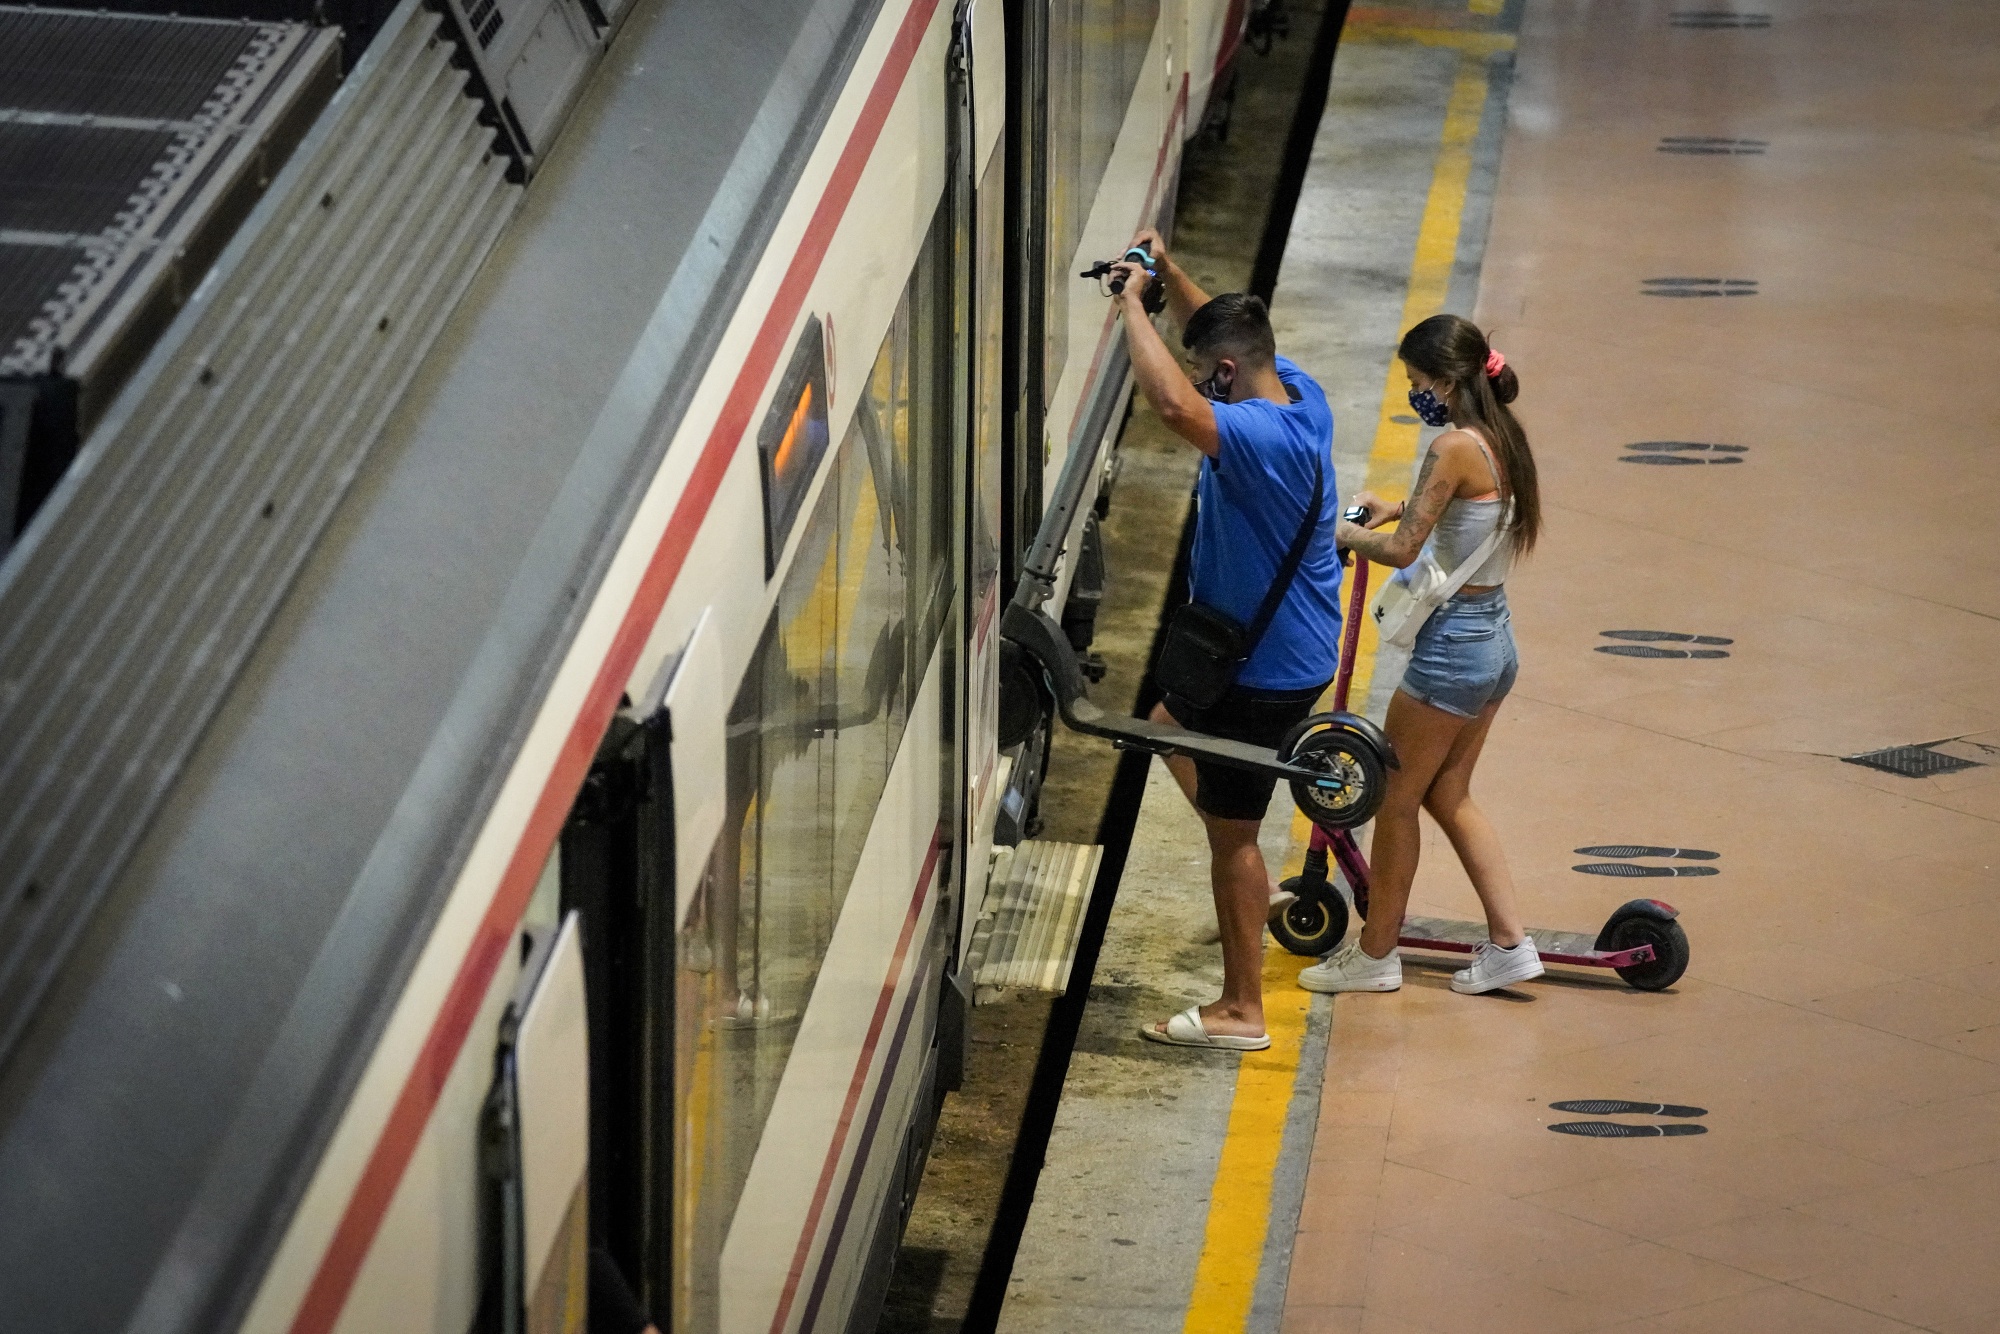 Passengers with electric scooters board a train in Madrid.